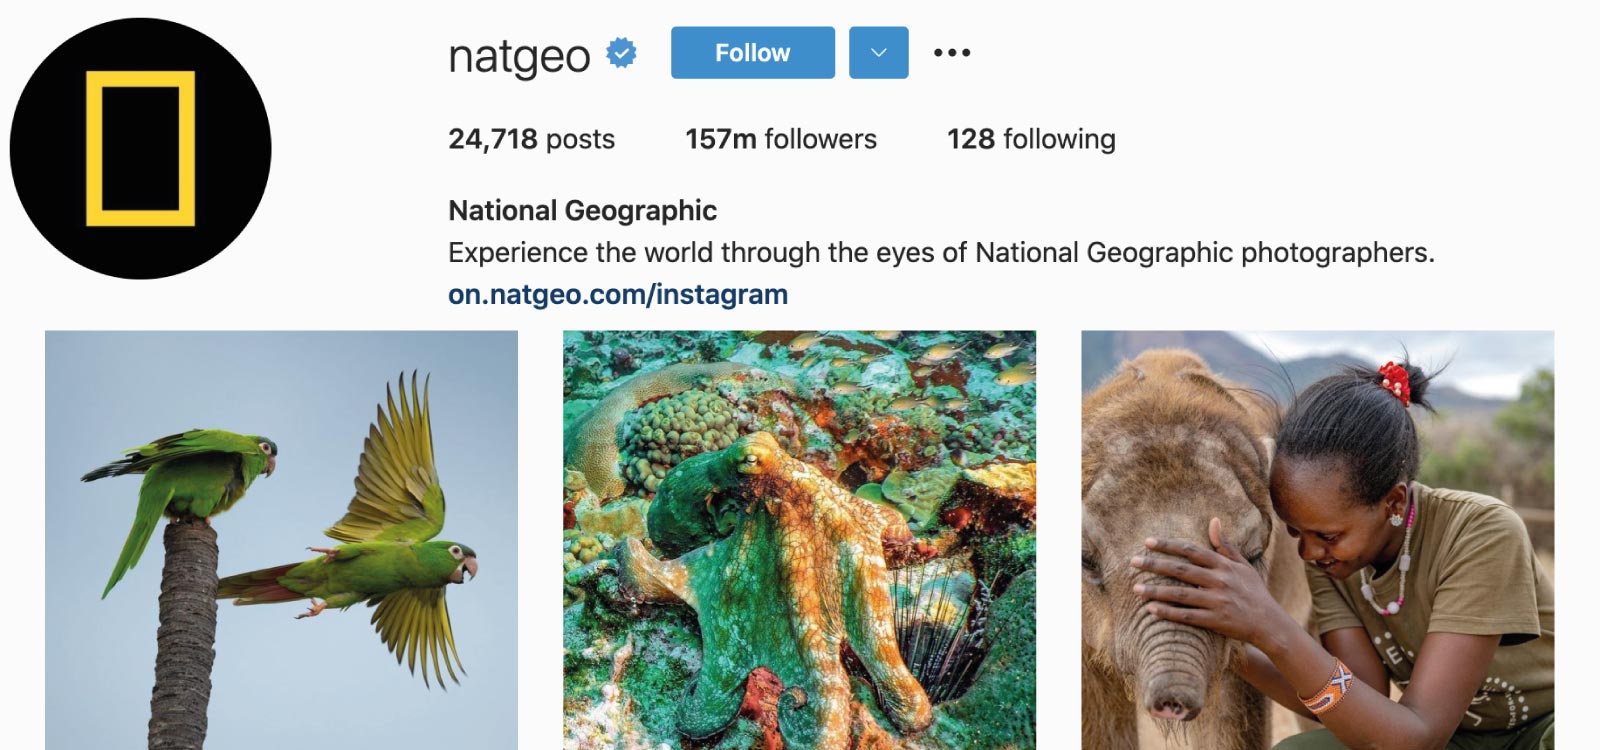 Instagram Statistics and facts - National Geographic